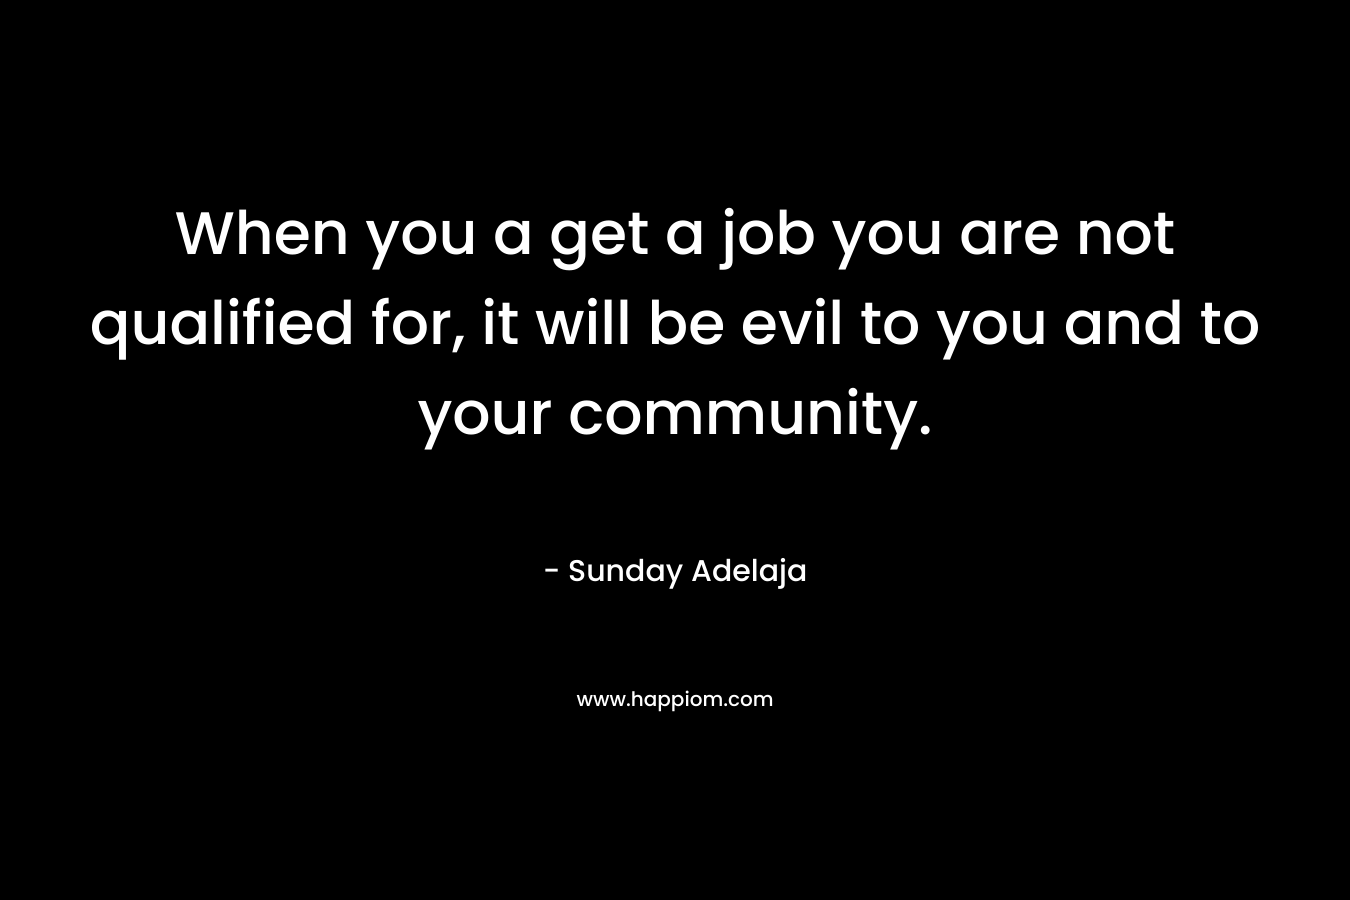 When you a get a job you are not qualified for, it will be evil to you and to your community. – Sunday Adelaja